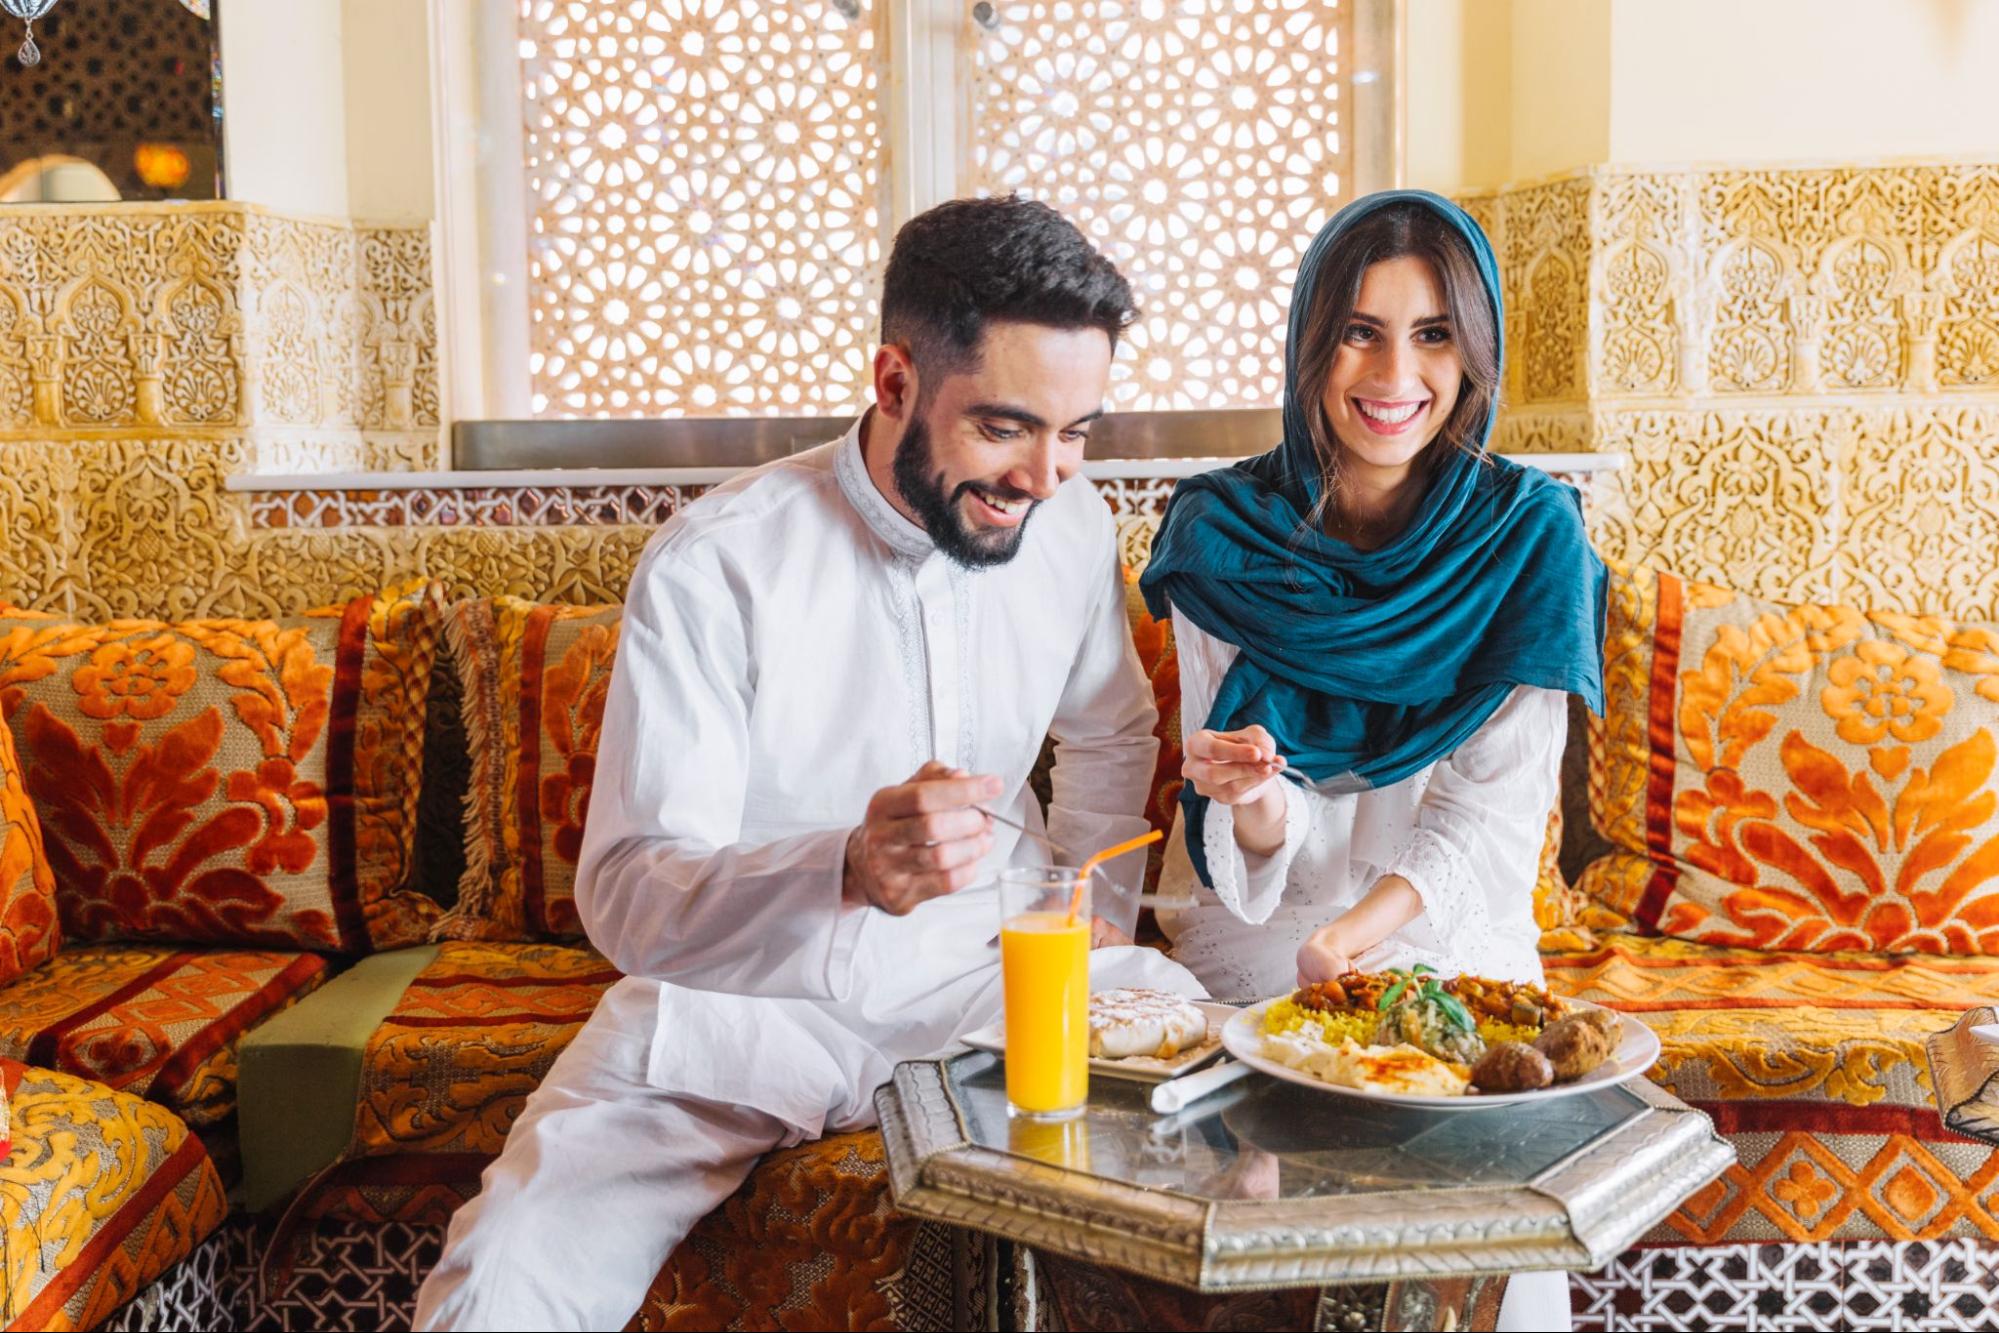 A romantic breakfast in Morocco - a unique gourmet dining experience for a memorable birthday gift